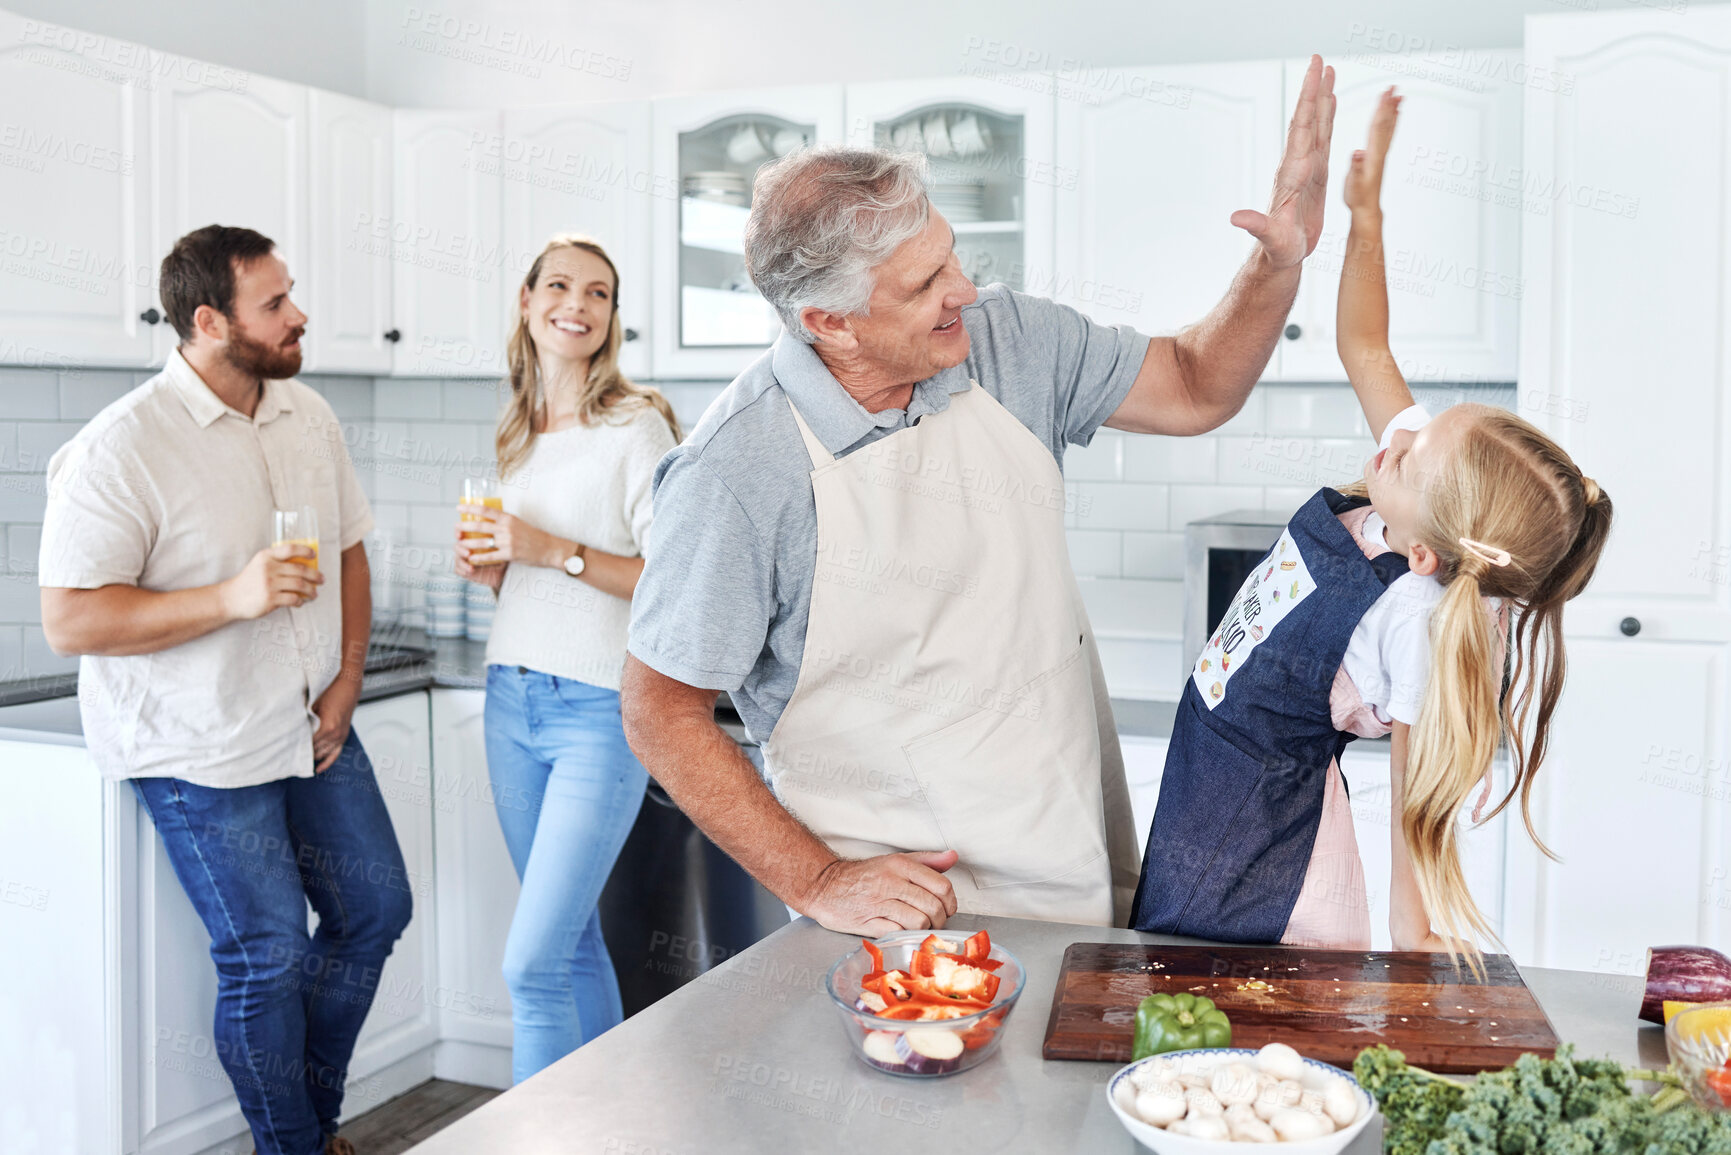 Buy stock photo High five, happy family and cooking together success in kitchen bonding activity. Parents smile, senior man teach kid to make healthy lunch and good job child development through learning at home
